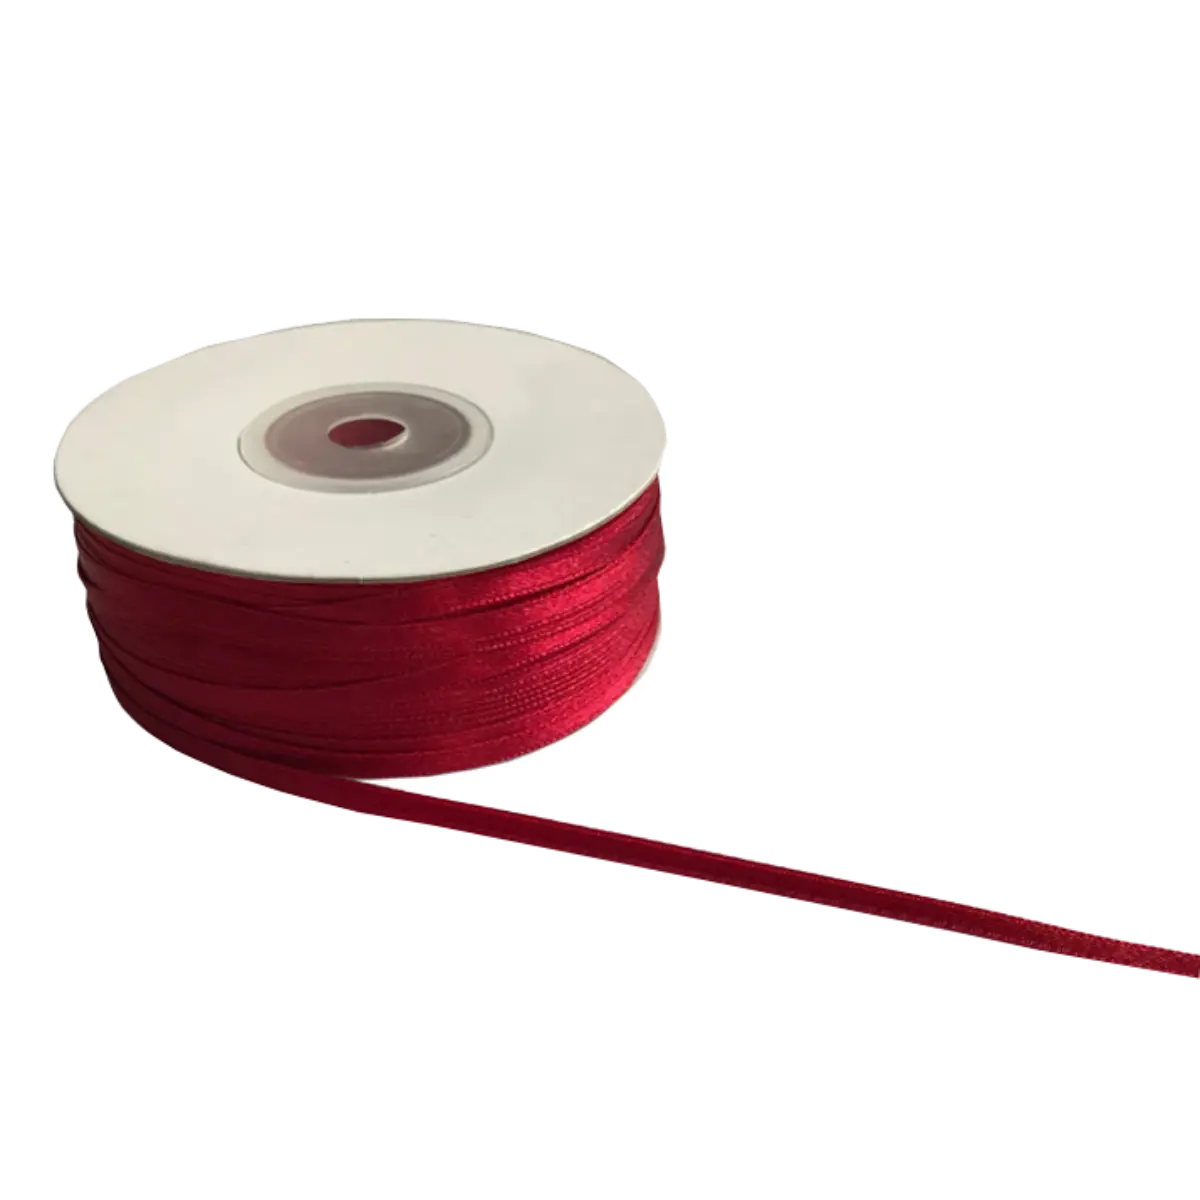 Claret Red Double Sided Satin Ribbons - 3mm Wide By 10mts